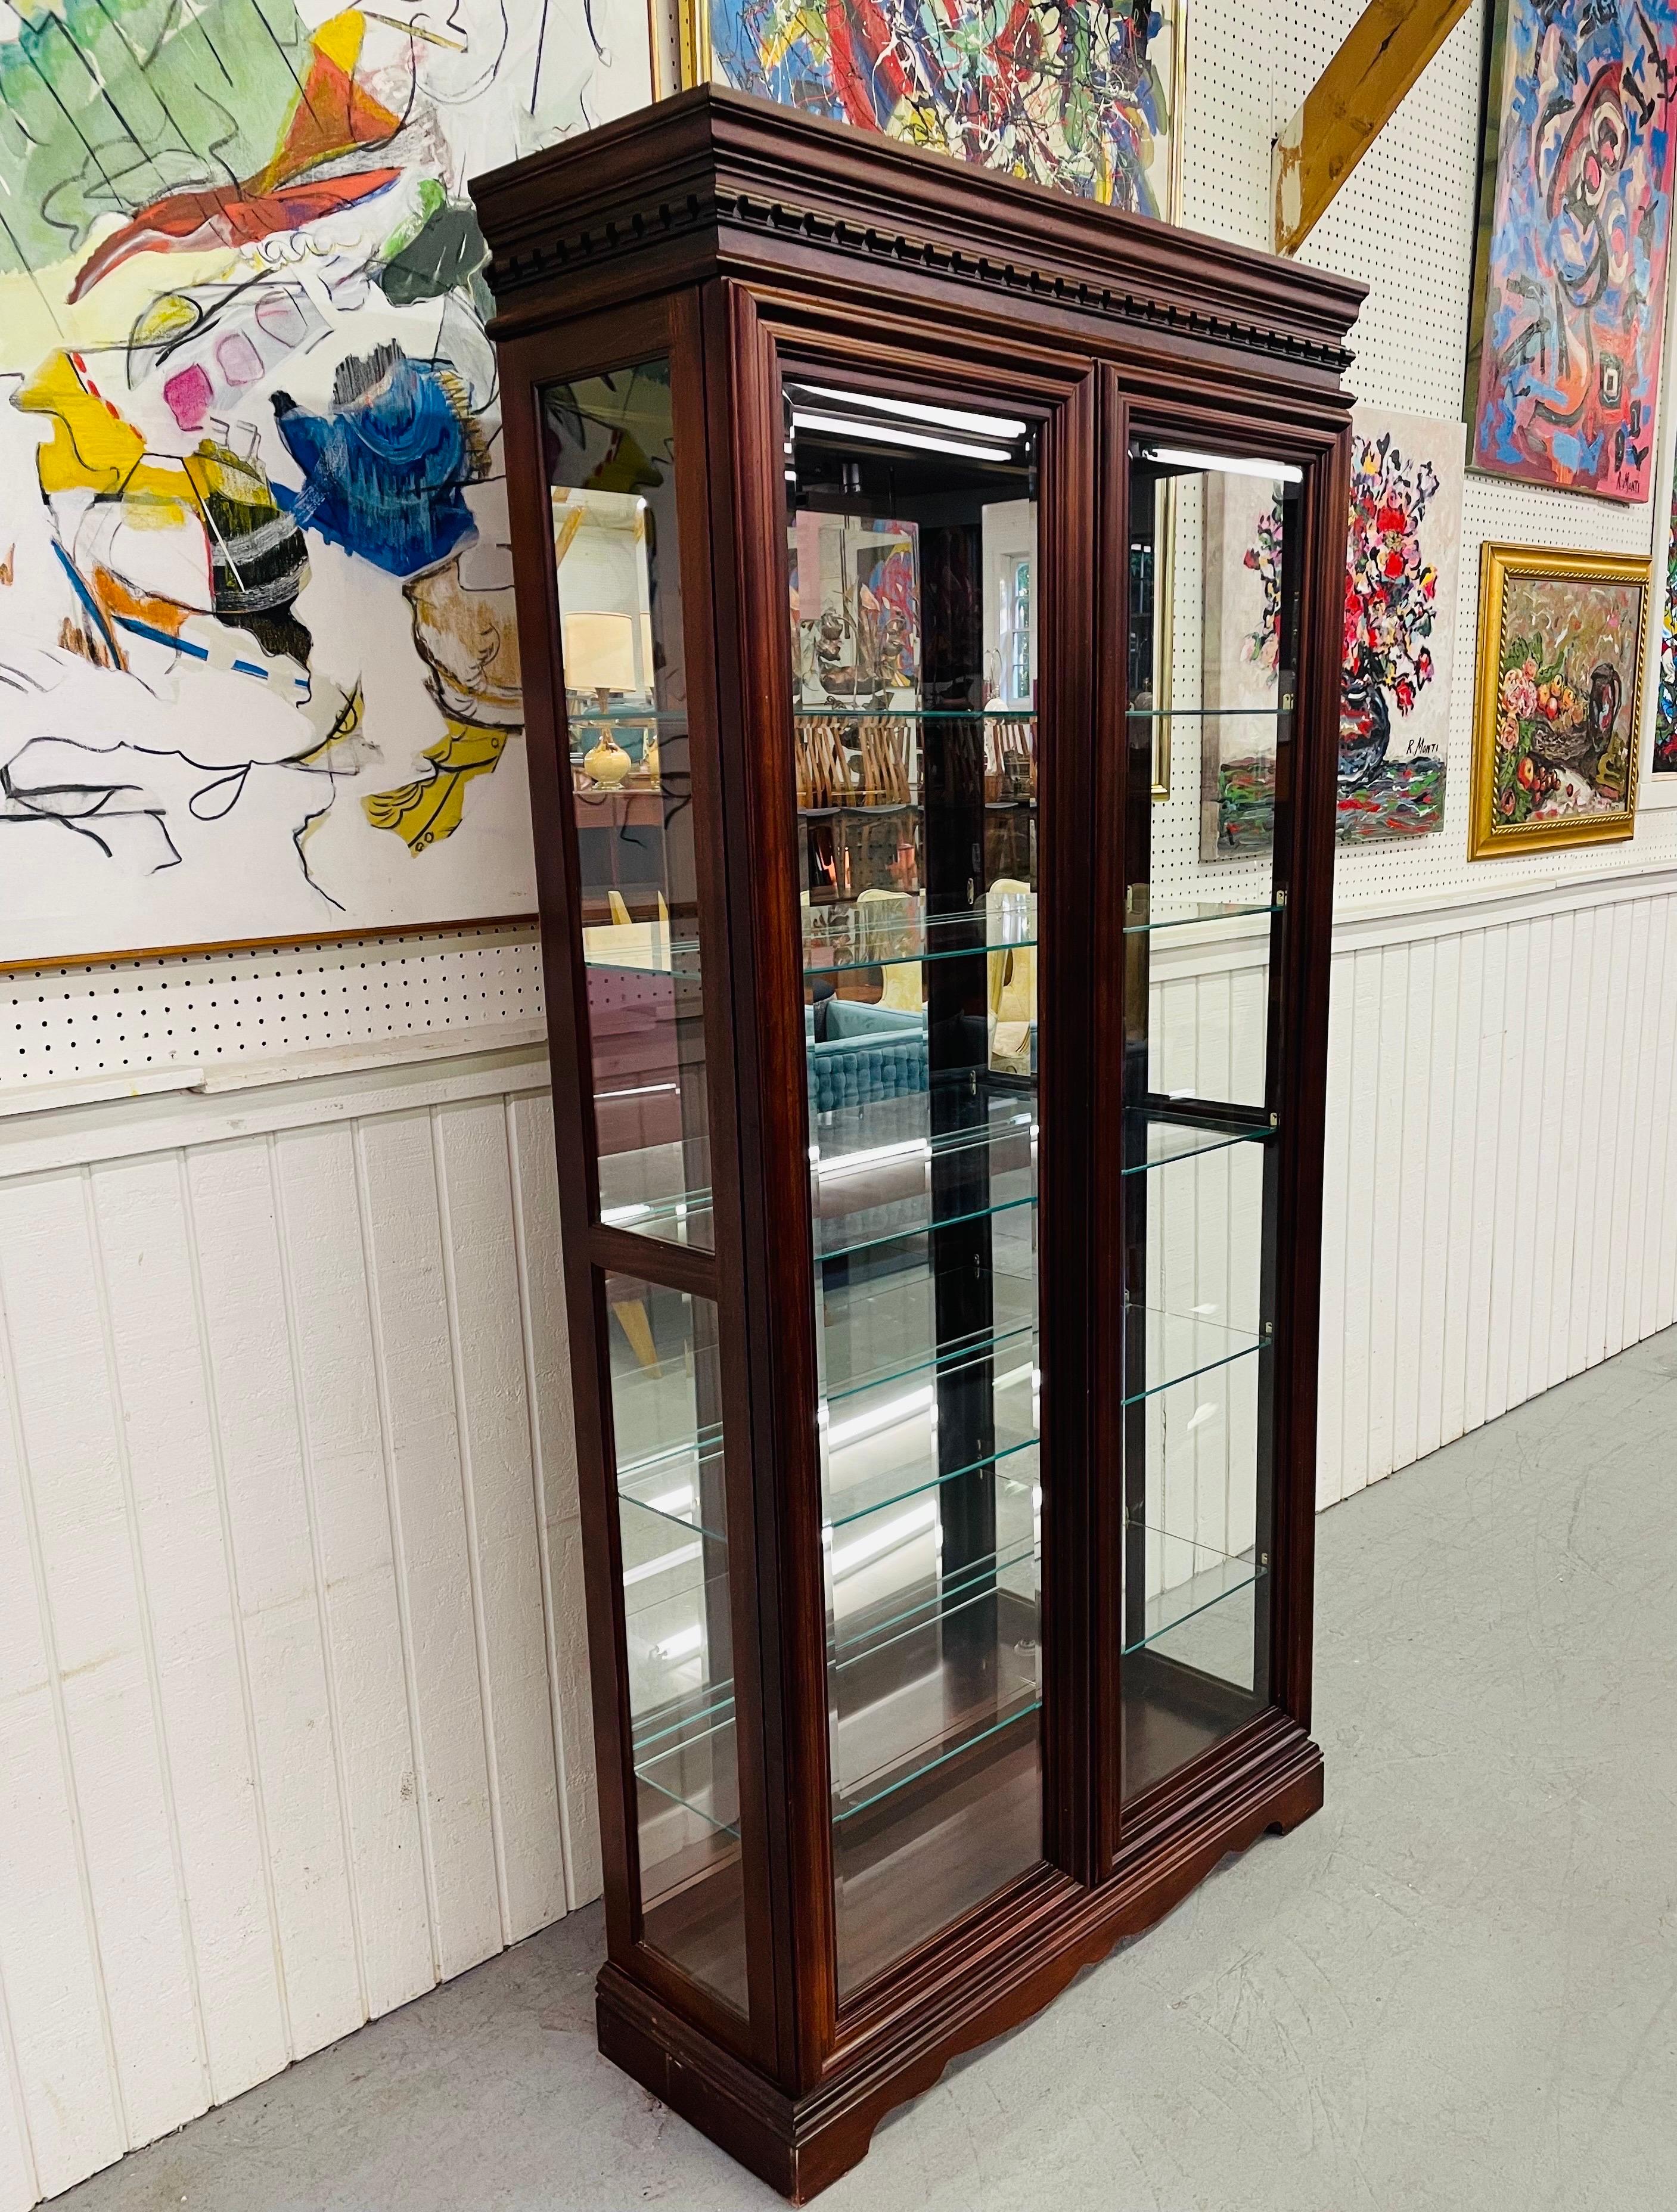 This listing is for a vintage Pulaski Mahogany Display Cabinet. Featuring sliding doors that open up to five glass shelves, a mirrored back, lighted interior, and a beautiful mahogany finish.